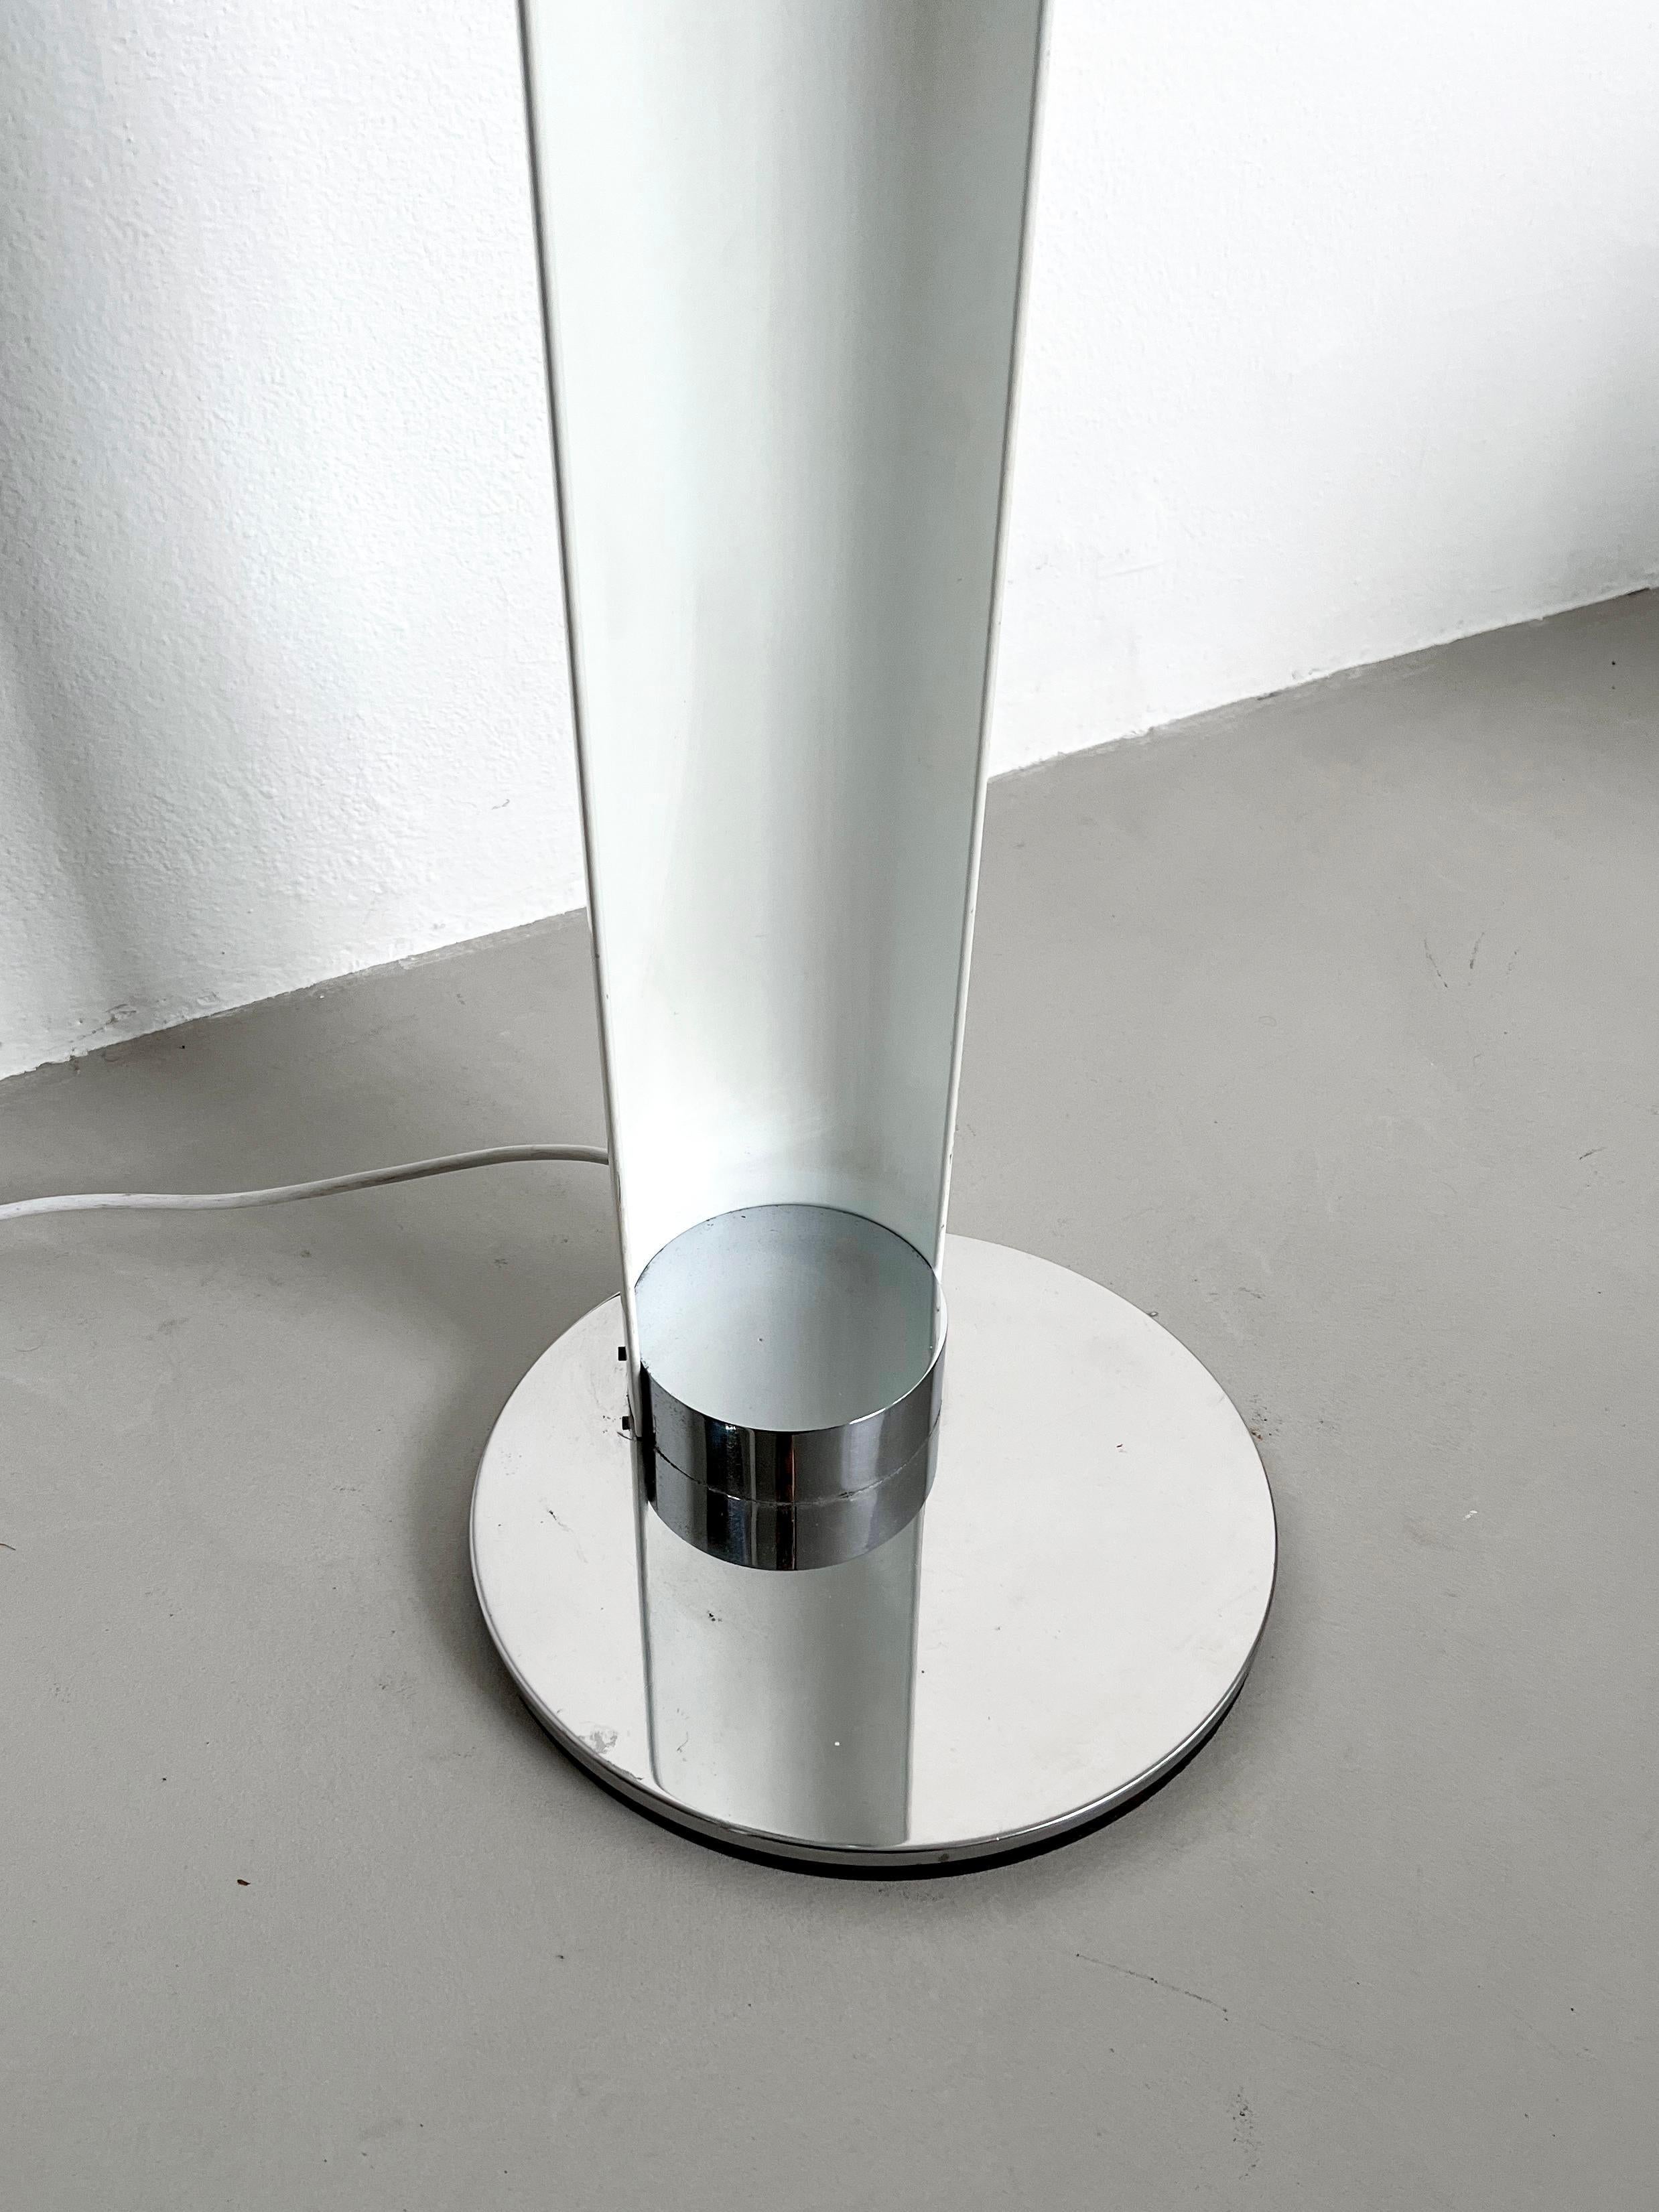 Space Age Floor Lamp, Chromed Metal, Totem, Collectible Light Sculpture For Sale 1